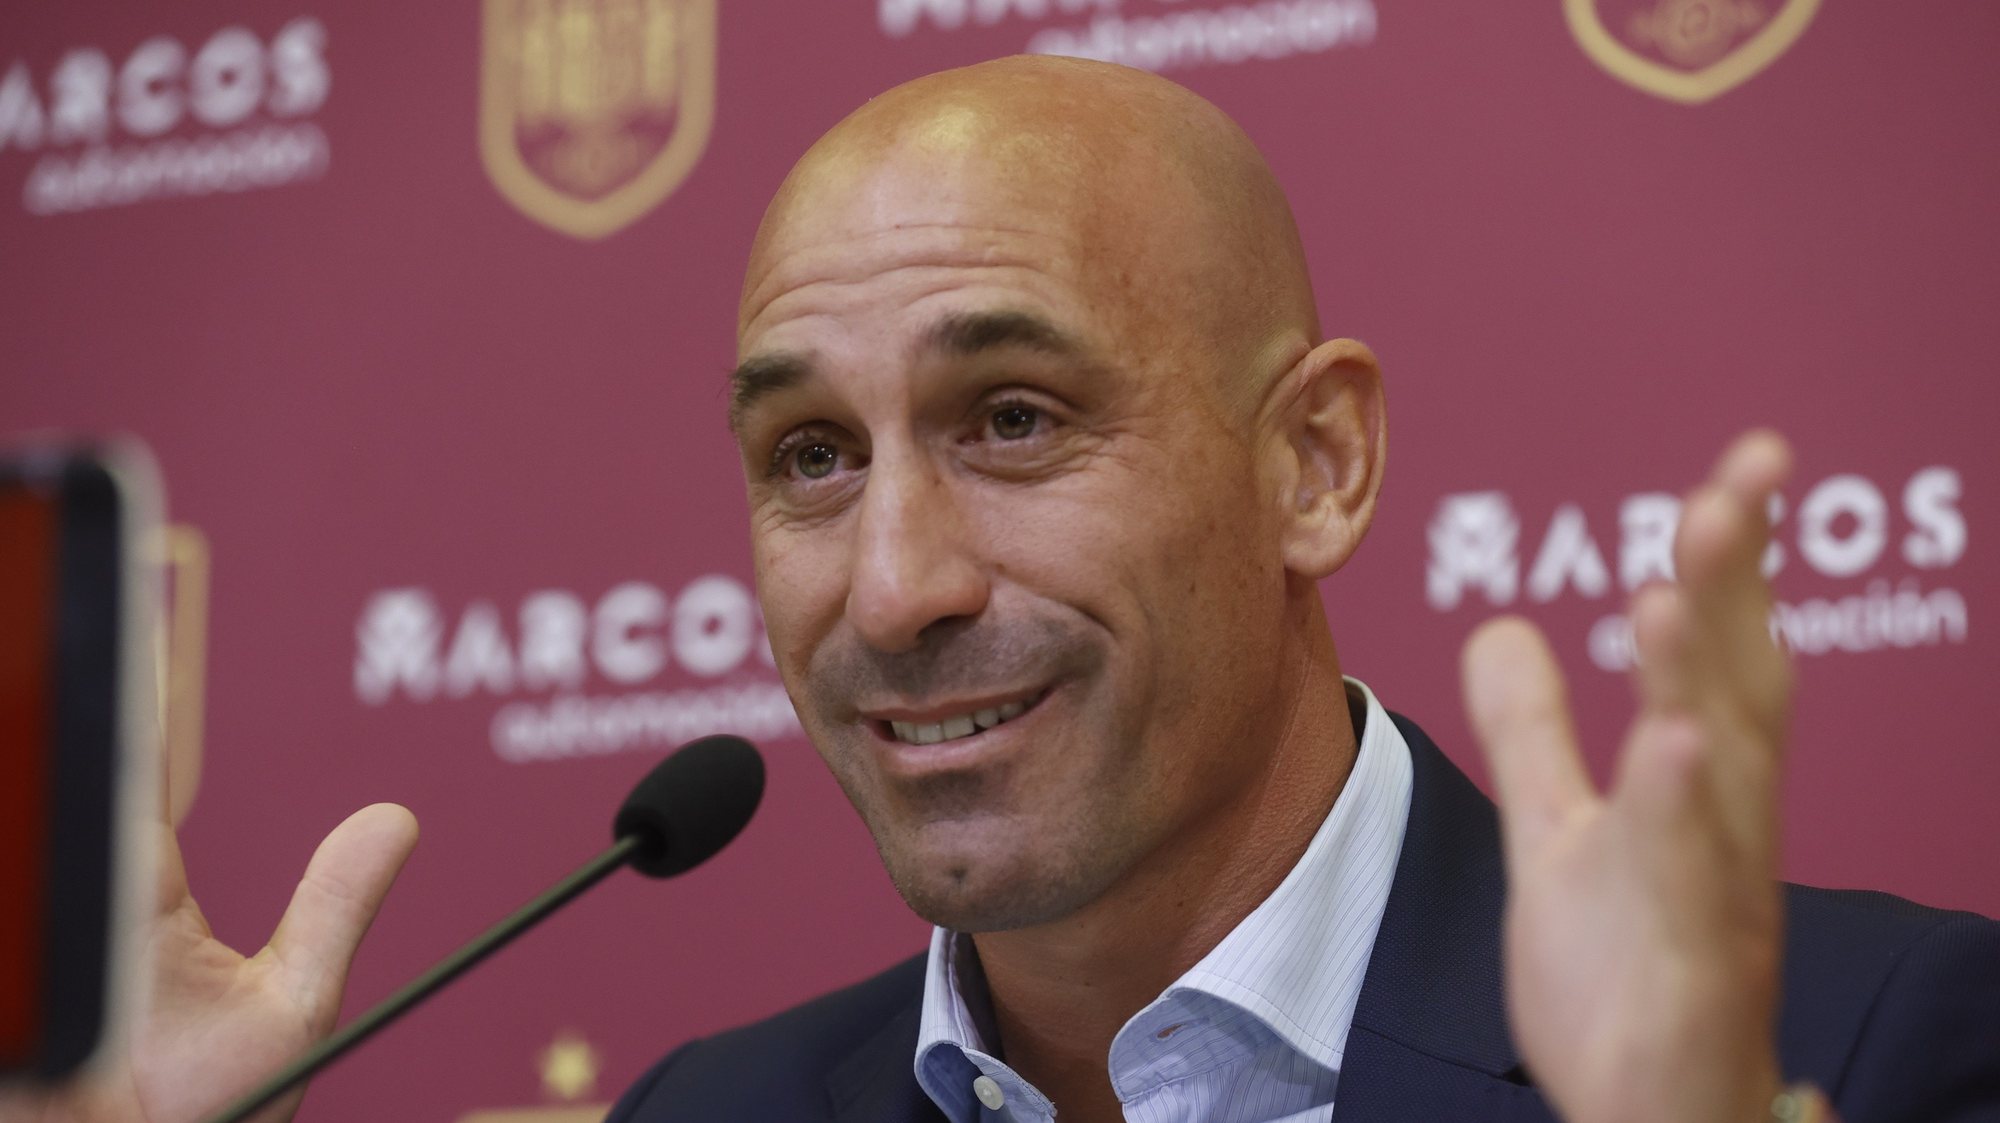 epa10853513 (FILE) - Spanish RFEF President Luis Rubiales speaks during a presser in Madrid, Spain, 22 September 2022 (Reissued 10 September 2023). Luis Rubiales has resigned on 10 September 2023, as president of the Royal Spanish Football Federation (RFEF) and vice president of UEFA&#039;s executive committee following widespread criticism for kissing Spain&#039;s forward Jenni Hermoso after winning the Women&#039;s World Cup final.  EPA/JUAN CARLOS HIDALGO